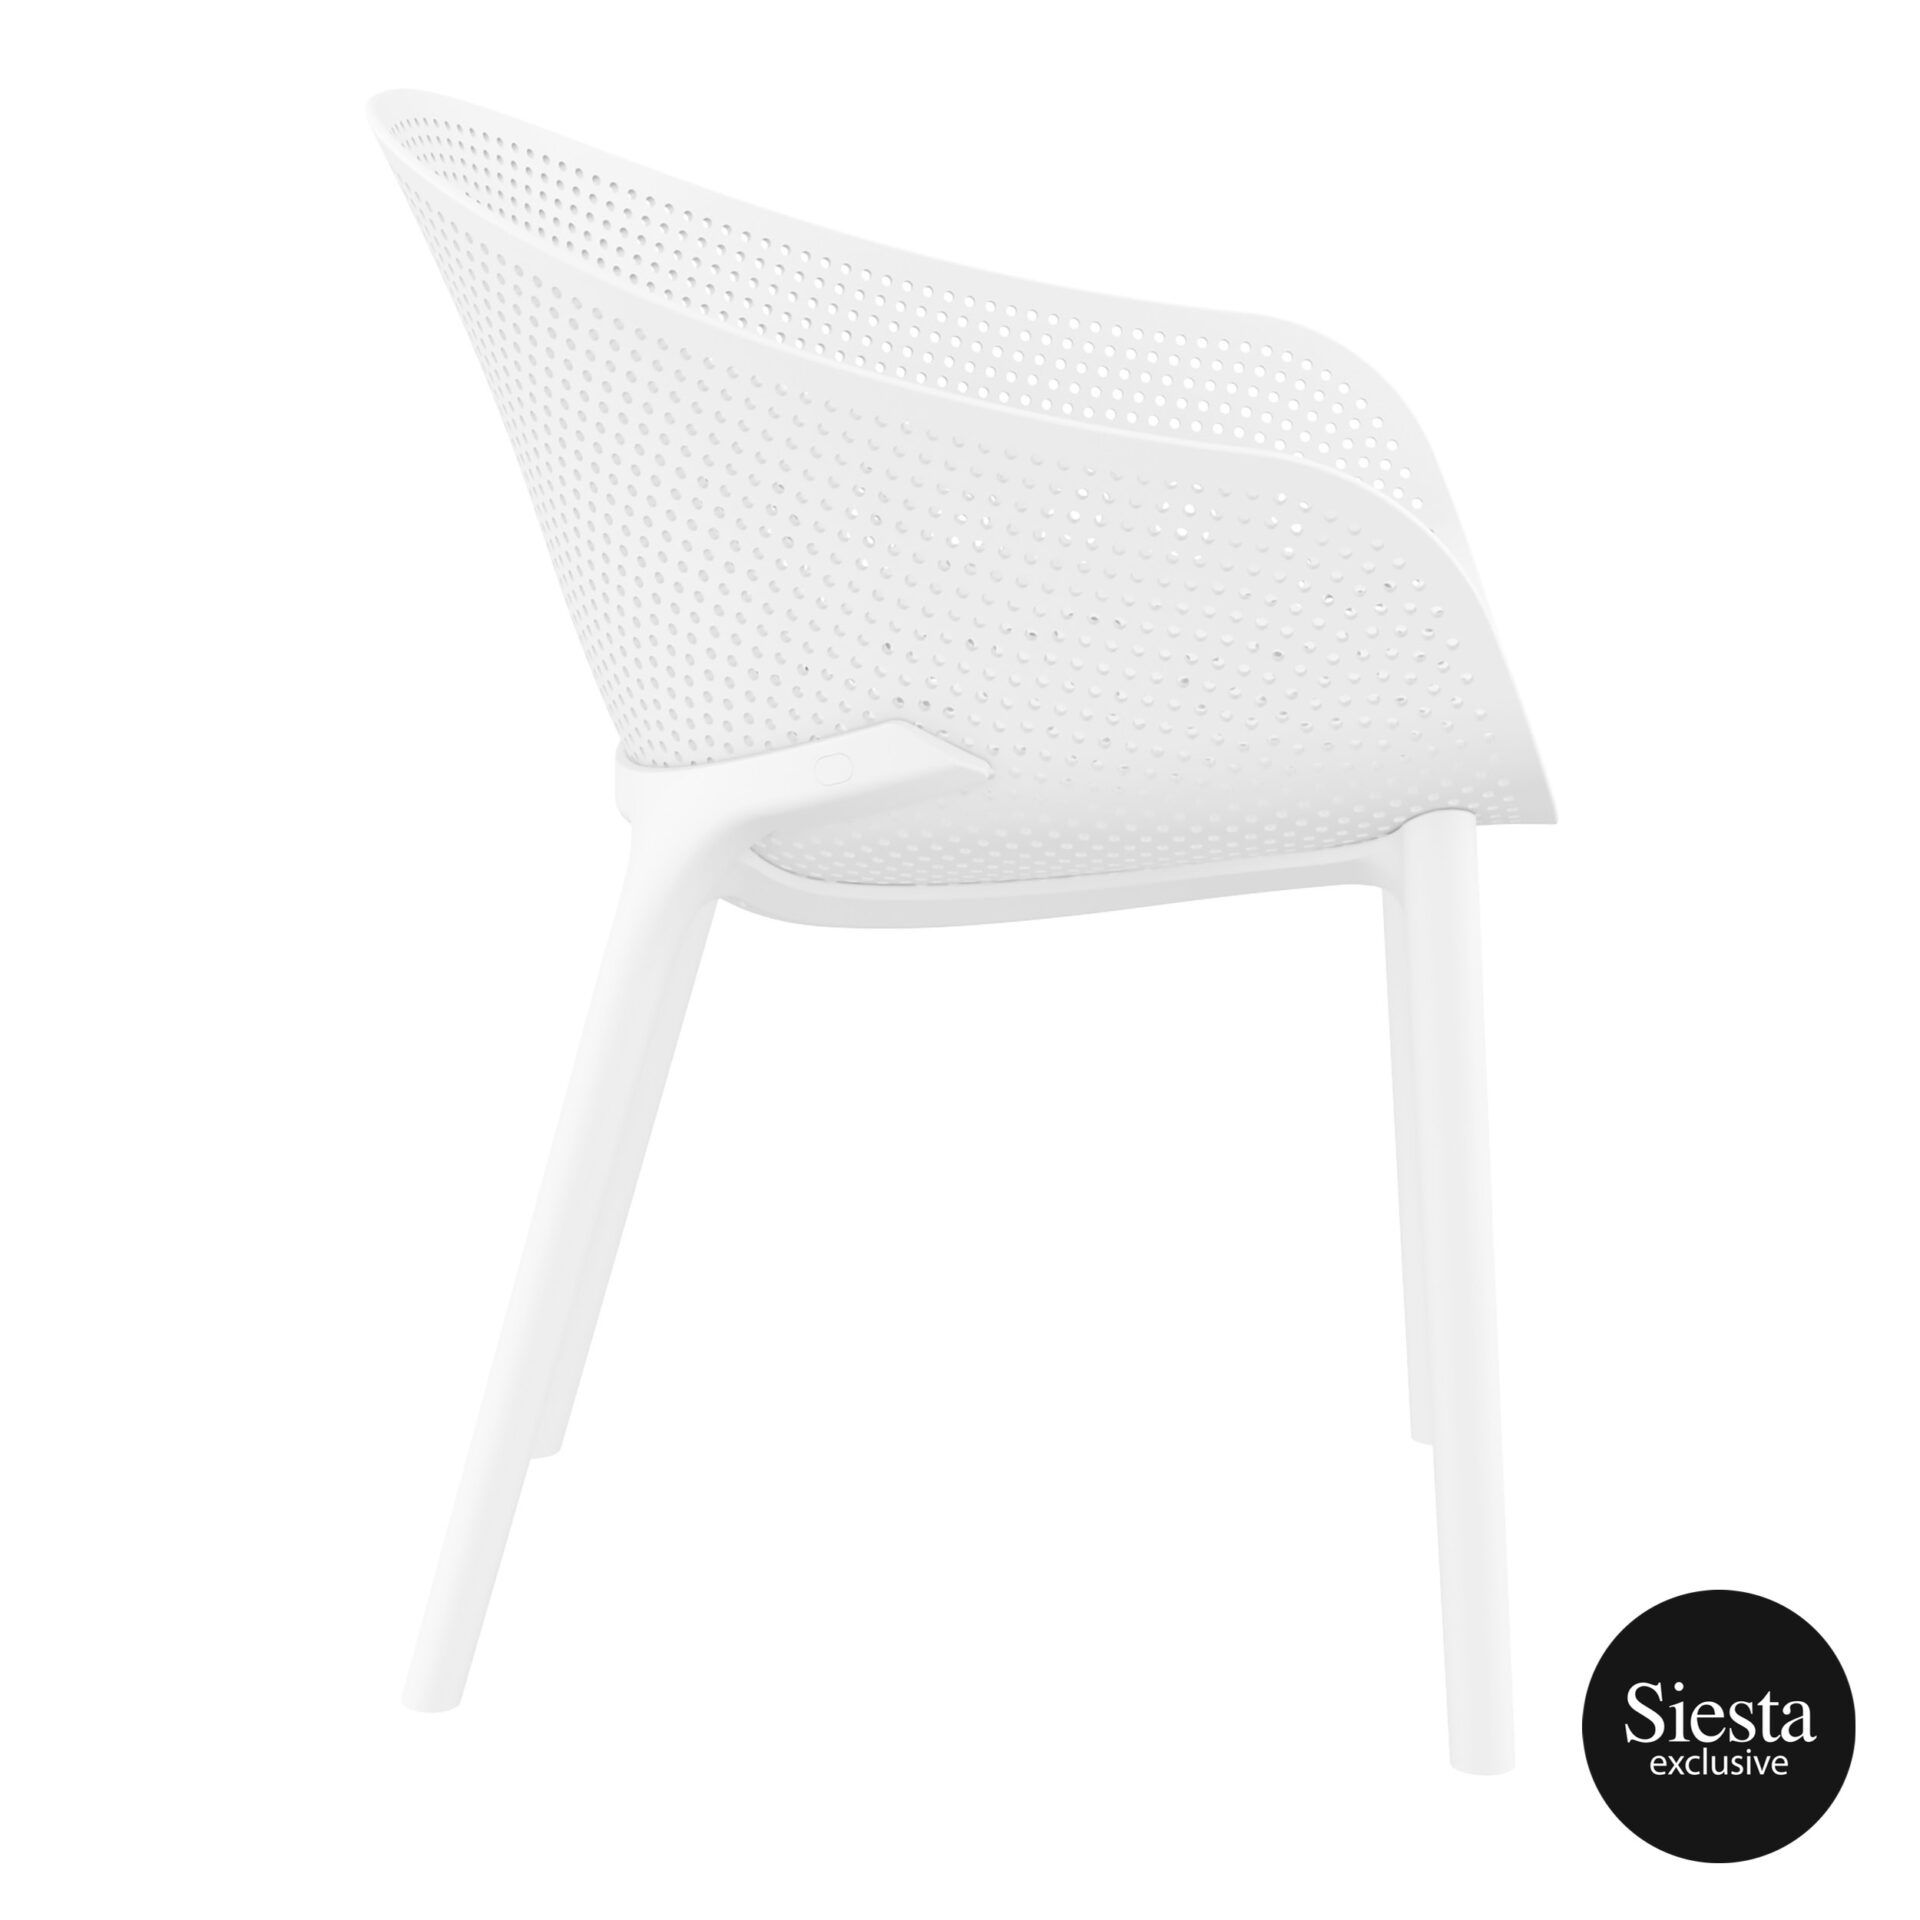 outdoor seating polypropylene sky chair white side 1